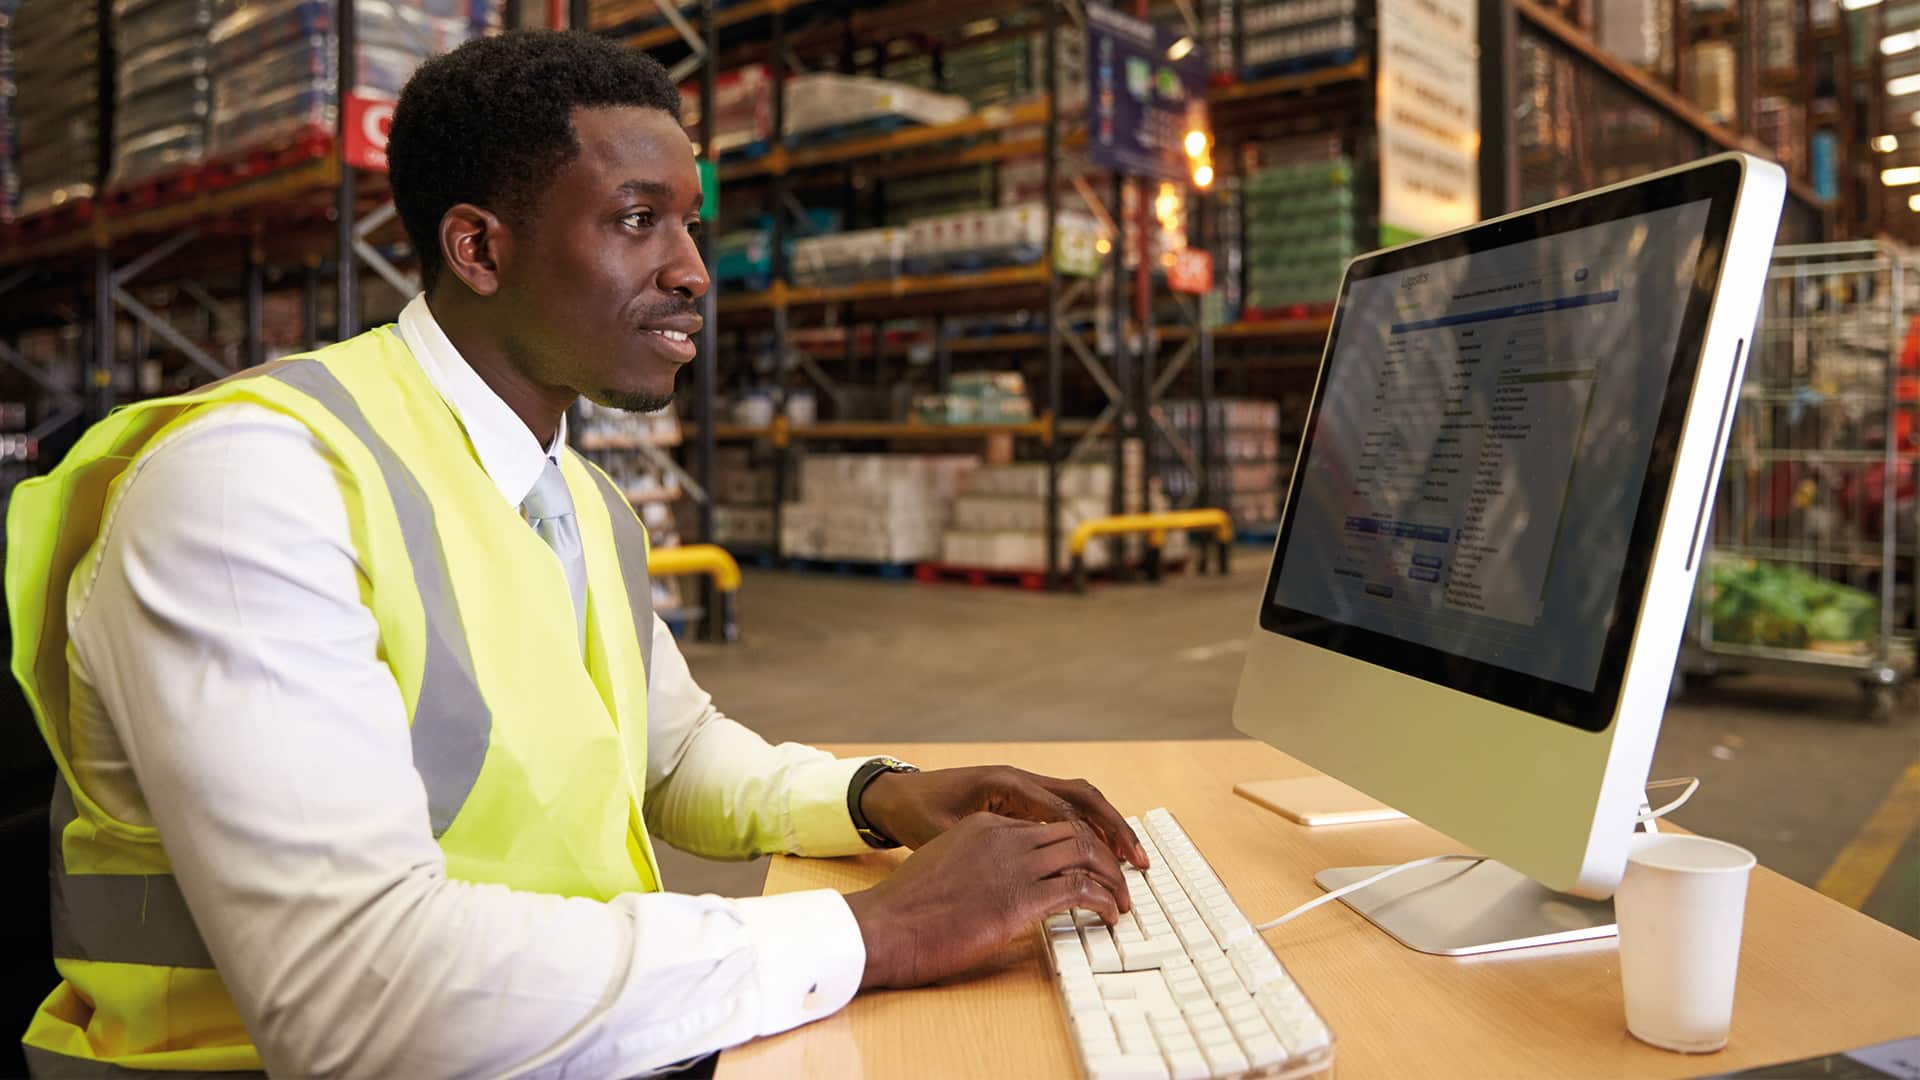 A photo of a man in a high-vis jacket on a computer.